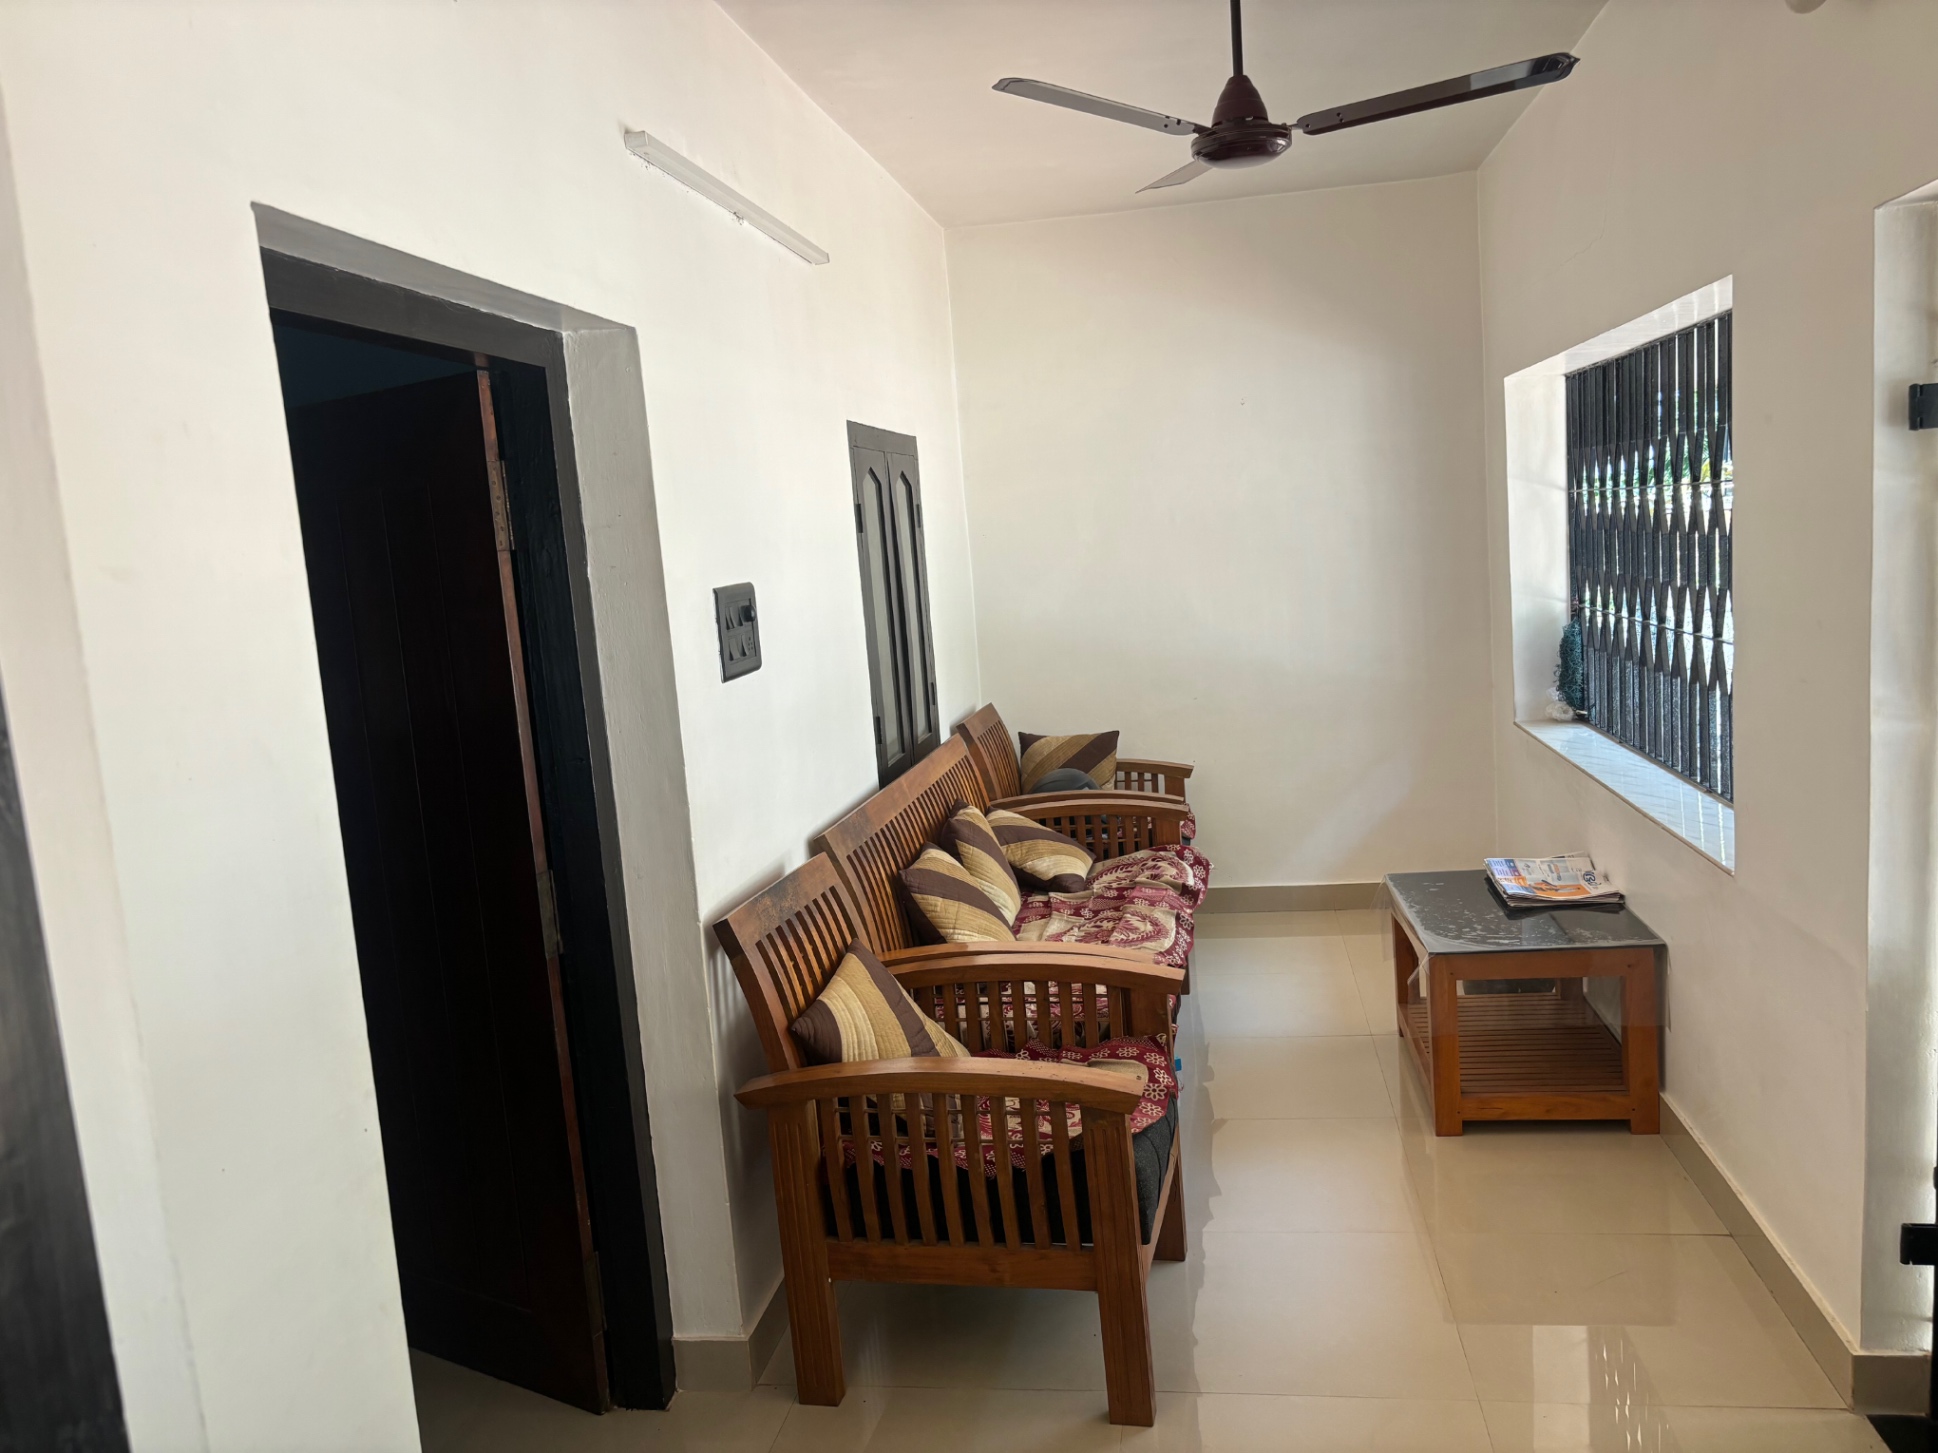 0 Bed/ 2 Bath Rent House/ Bungalow/ Villa; 1,100 sq. ft. carpet area, Semi Furnished for rent @Medical college